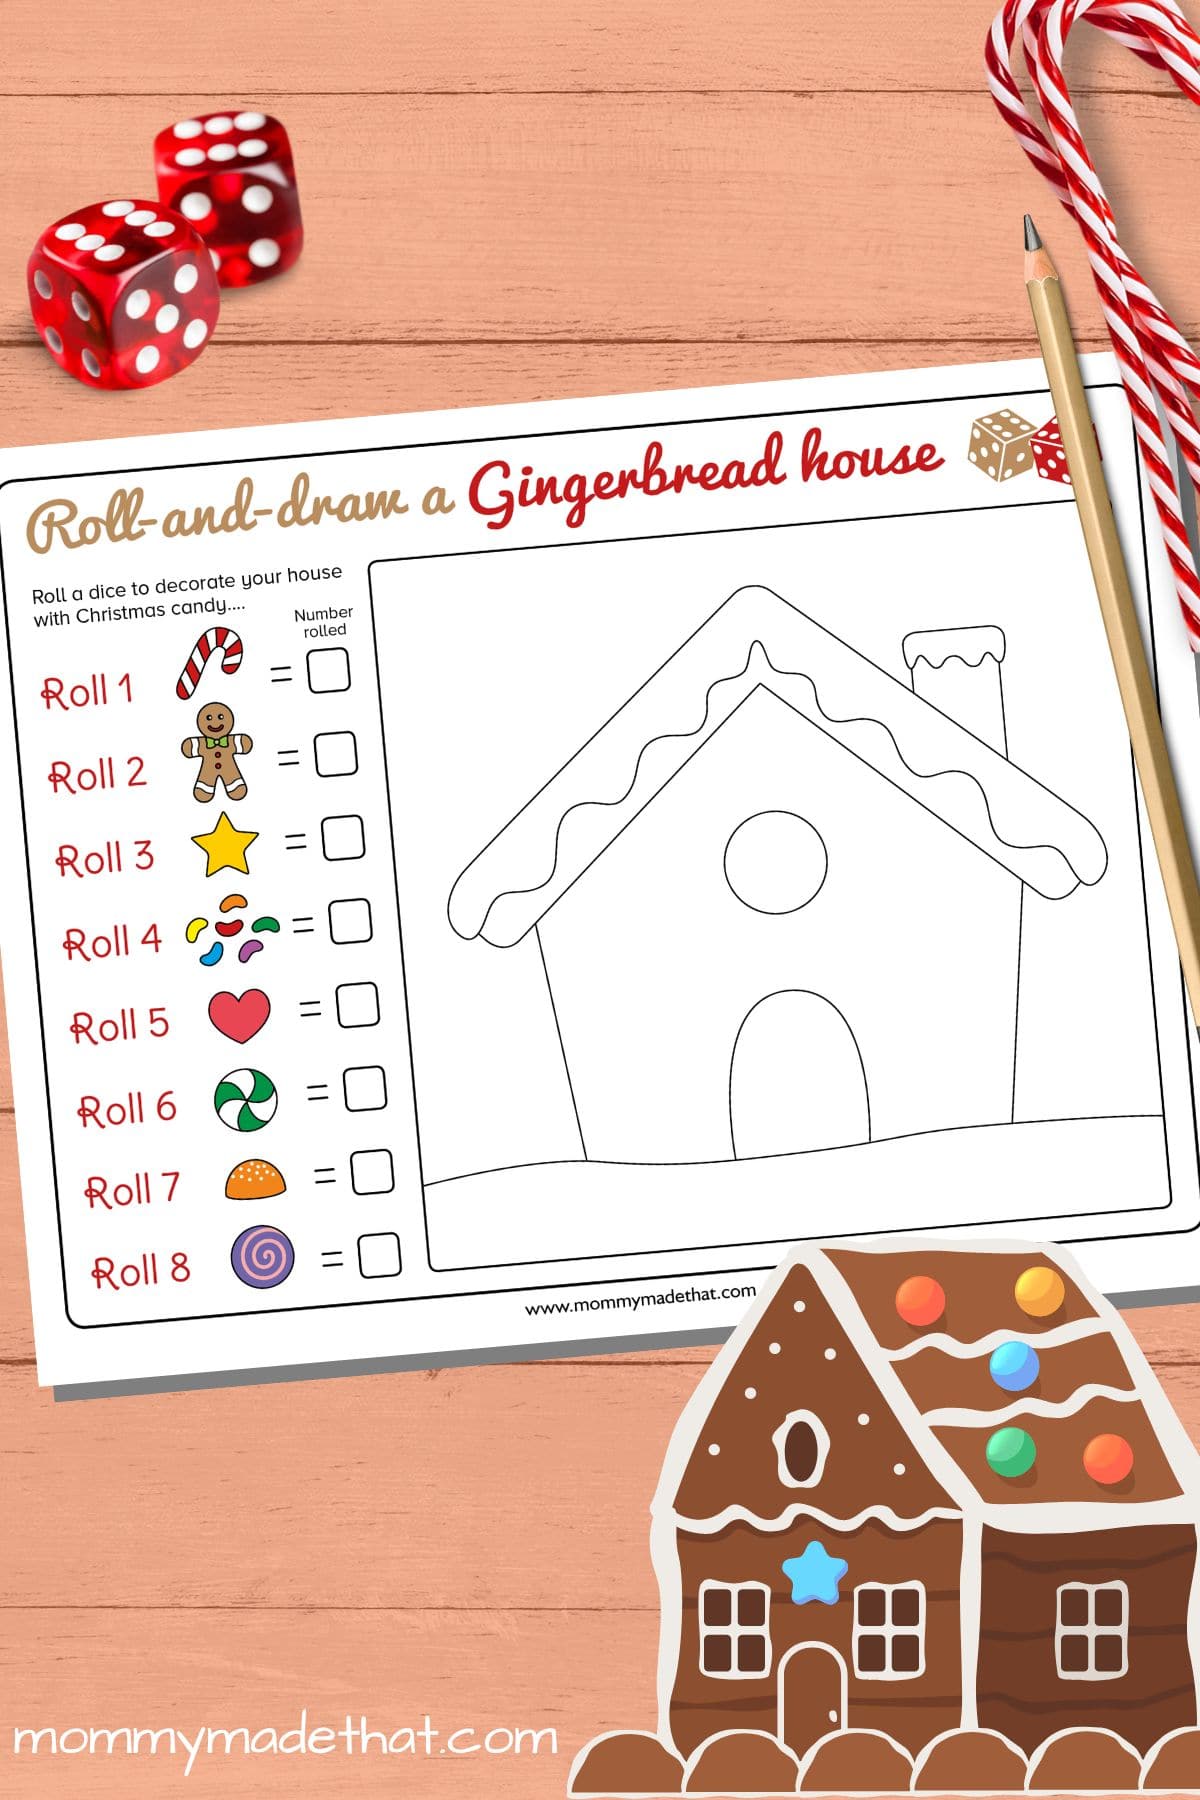 Roll a Gingerbread House Game (Cute Free Printable!)